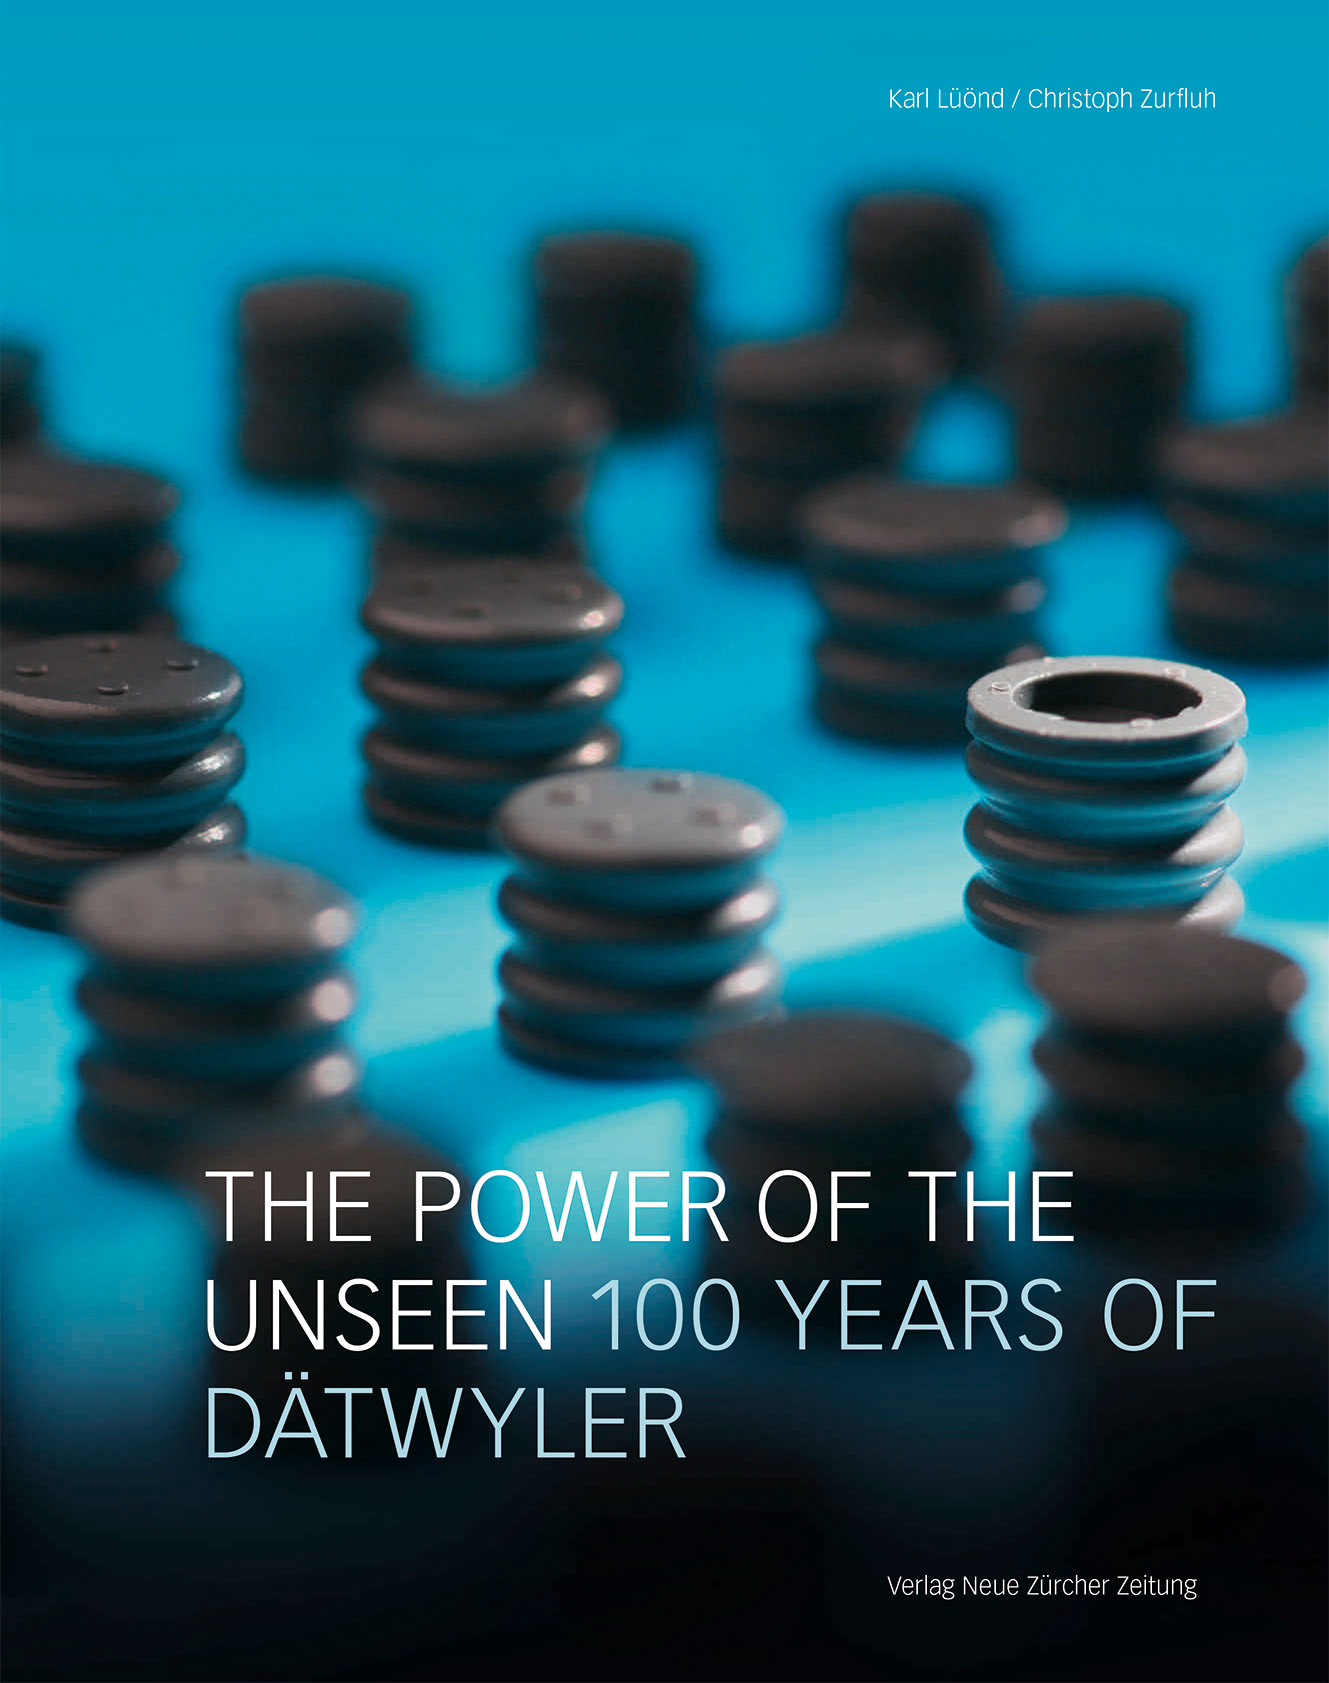 The power of the unseen – 100 years of Datwyler